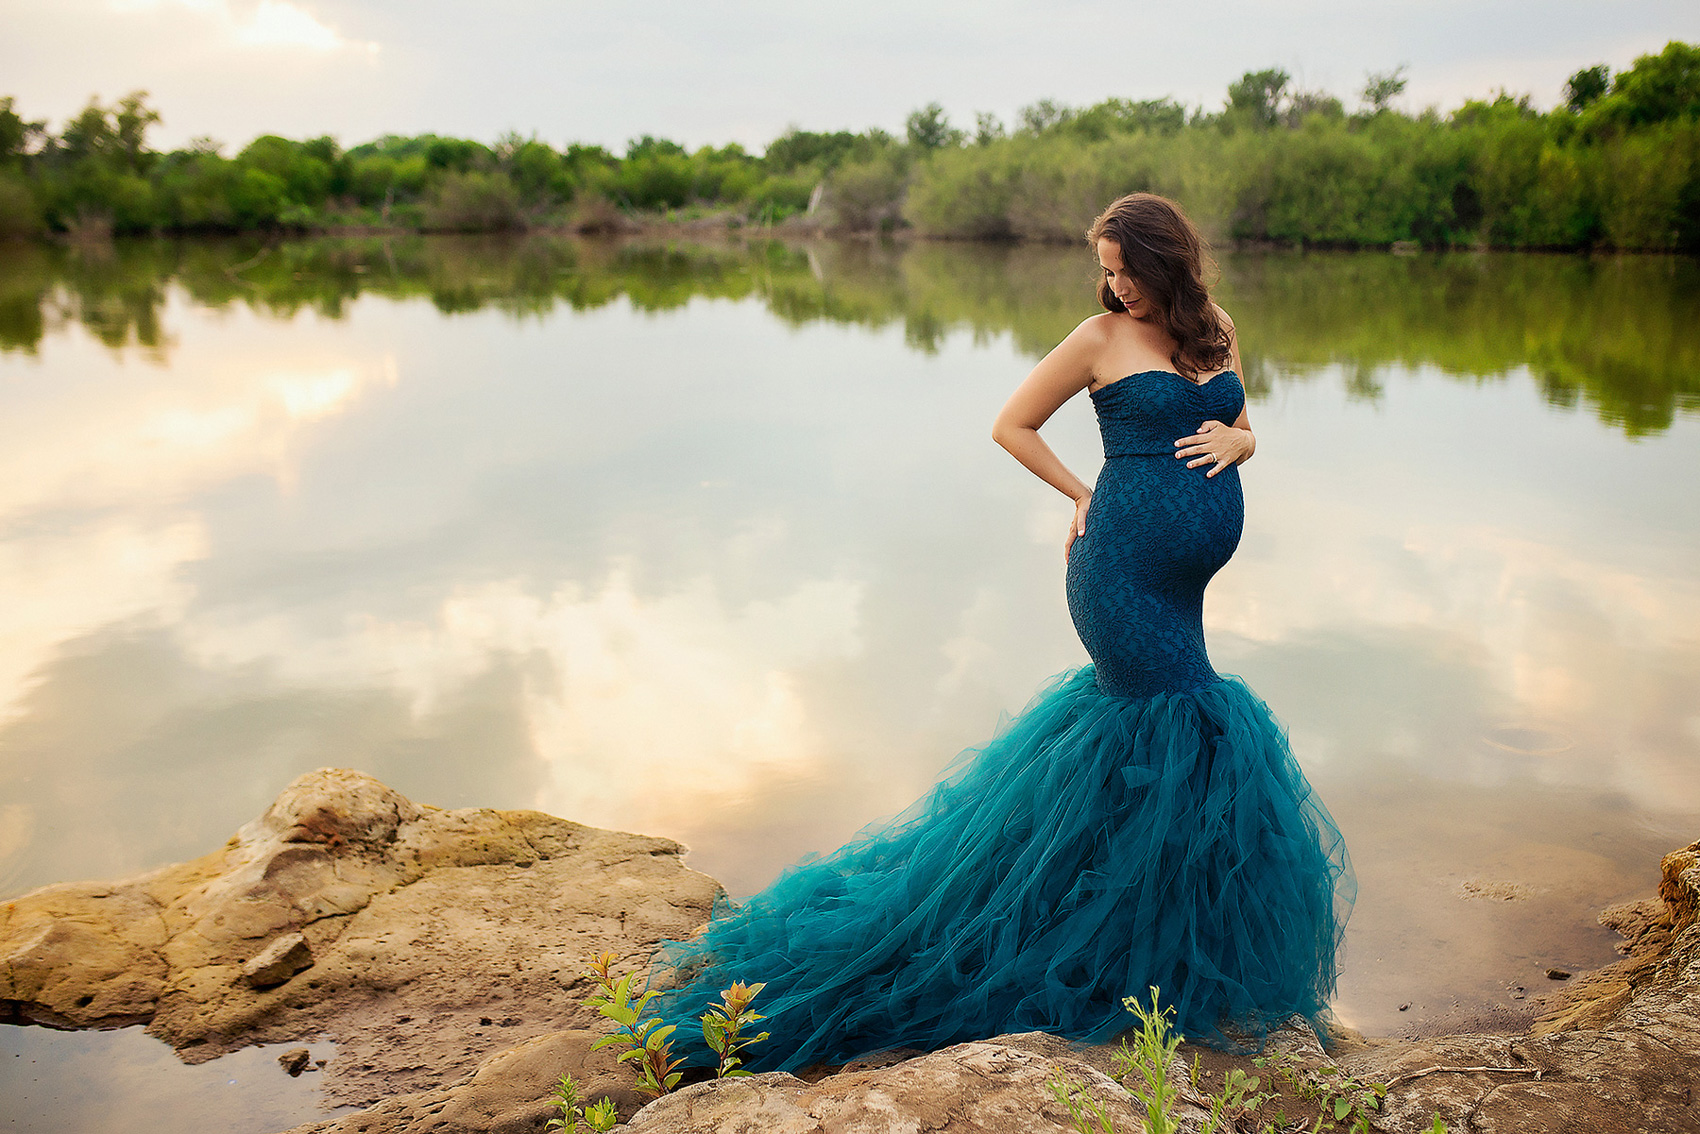 Warm and Bright Golden Hour Maternity Photo Session, Groton MA - Allie.Photo